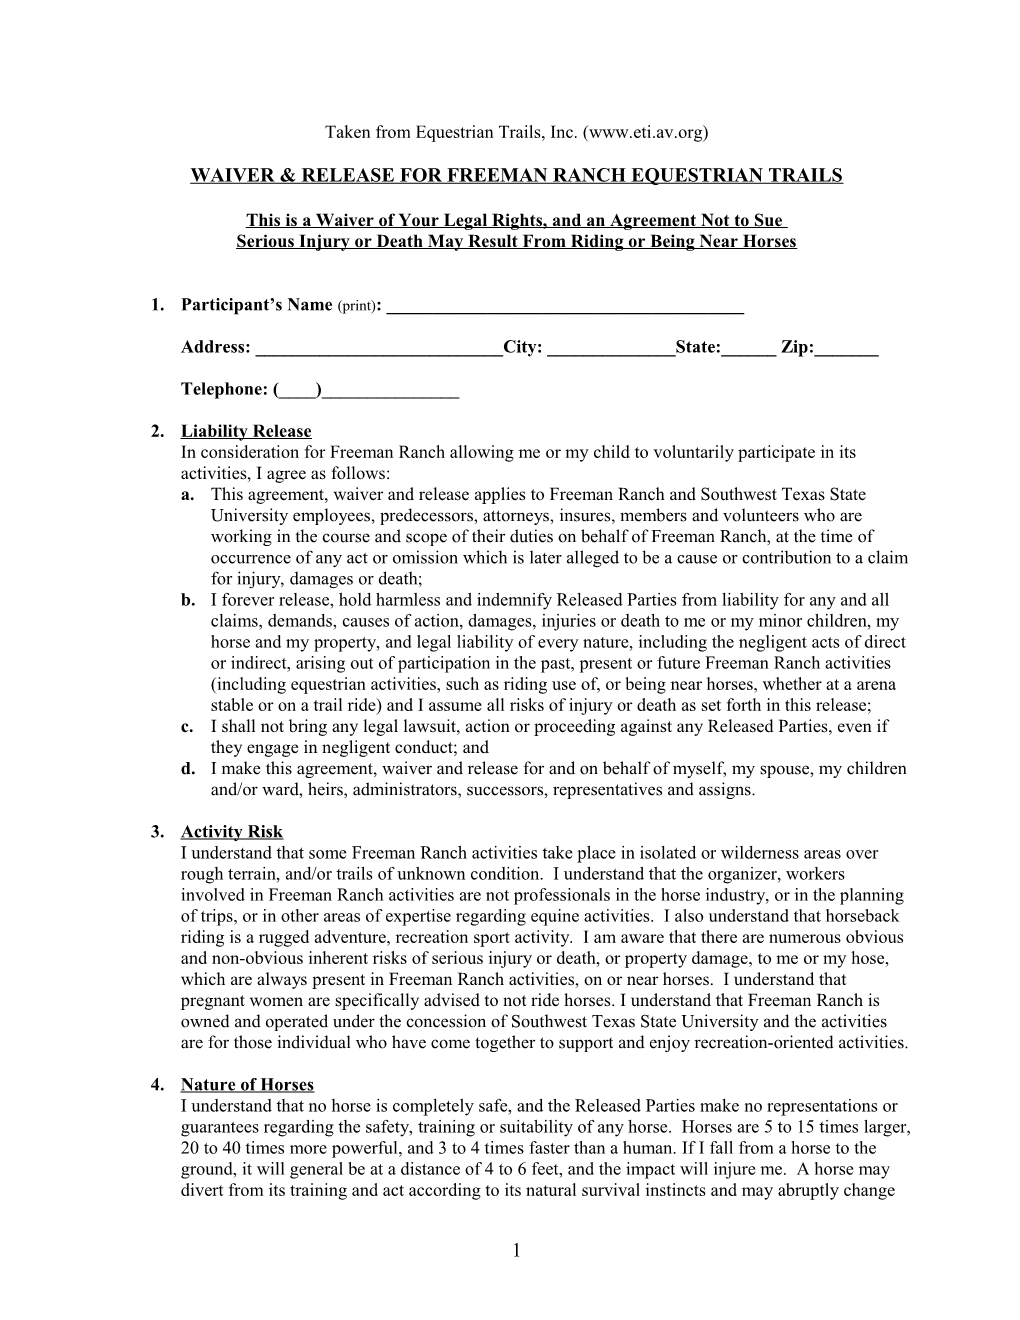 Waiver & Releasefor Freeman Ranch Equestrian Trails